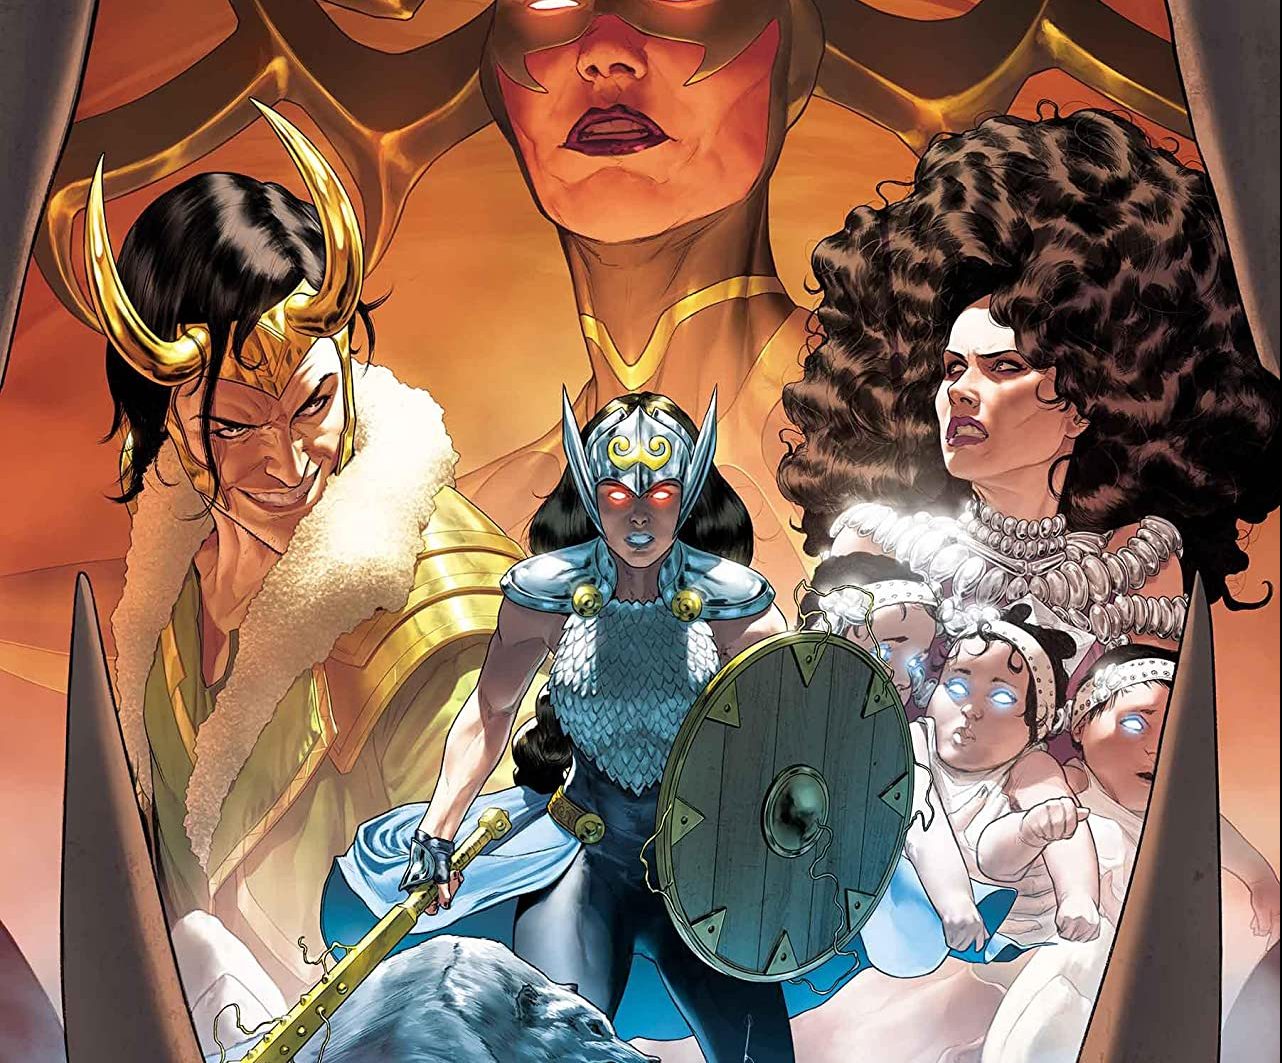 The Mighty Valkyries #1